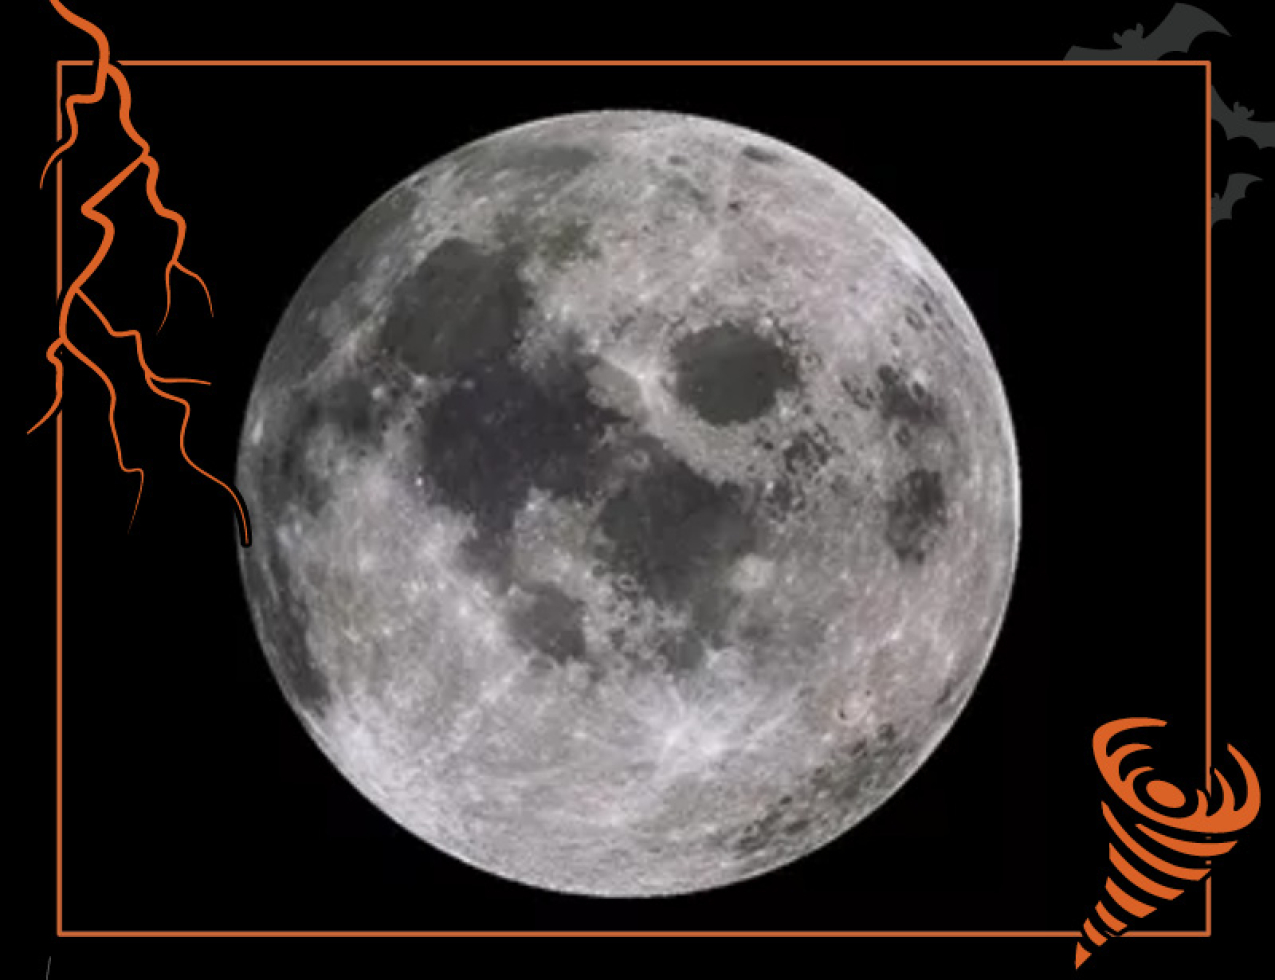 A satellite image of the moon. Border of the photo is black with orange atmospheric graphics of a lightning bolt and a tornado. Text: An ode to the moon, #NOAASpookyScience with NOAA logo.